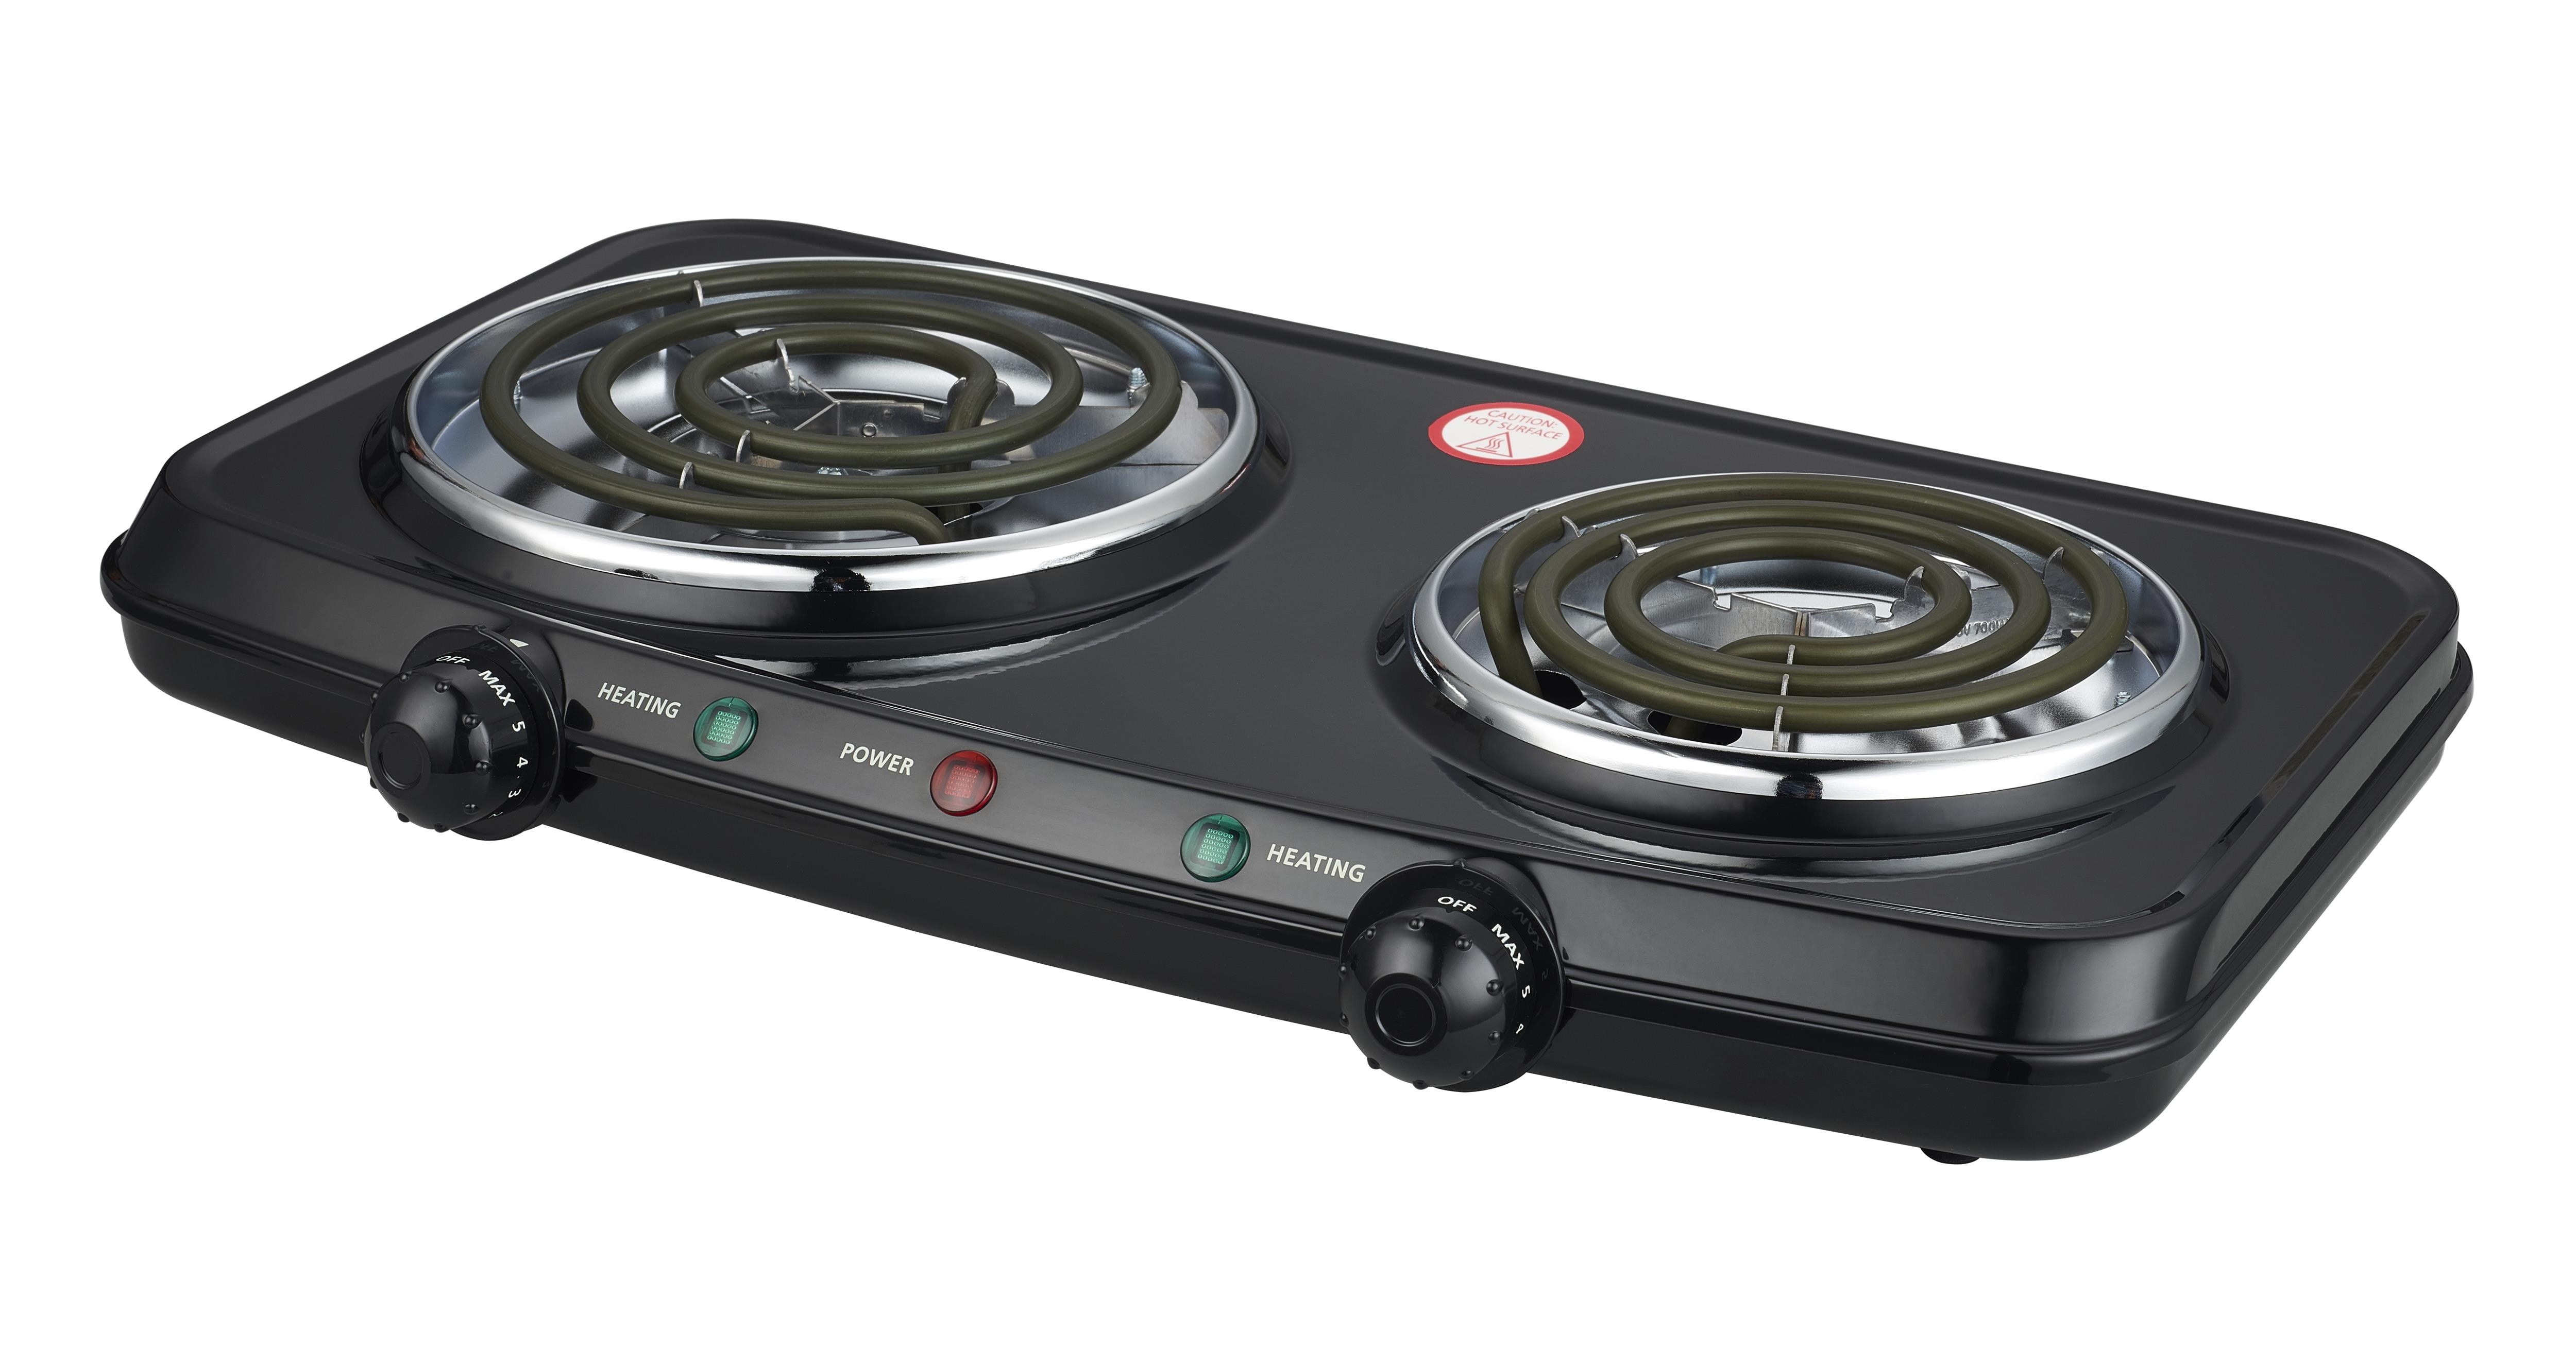 Mainstays Double Burner,120V~ 1800W, Portable,Easy to Cook,Elegant Classicdesign